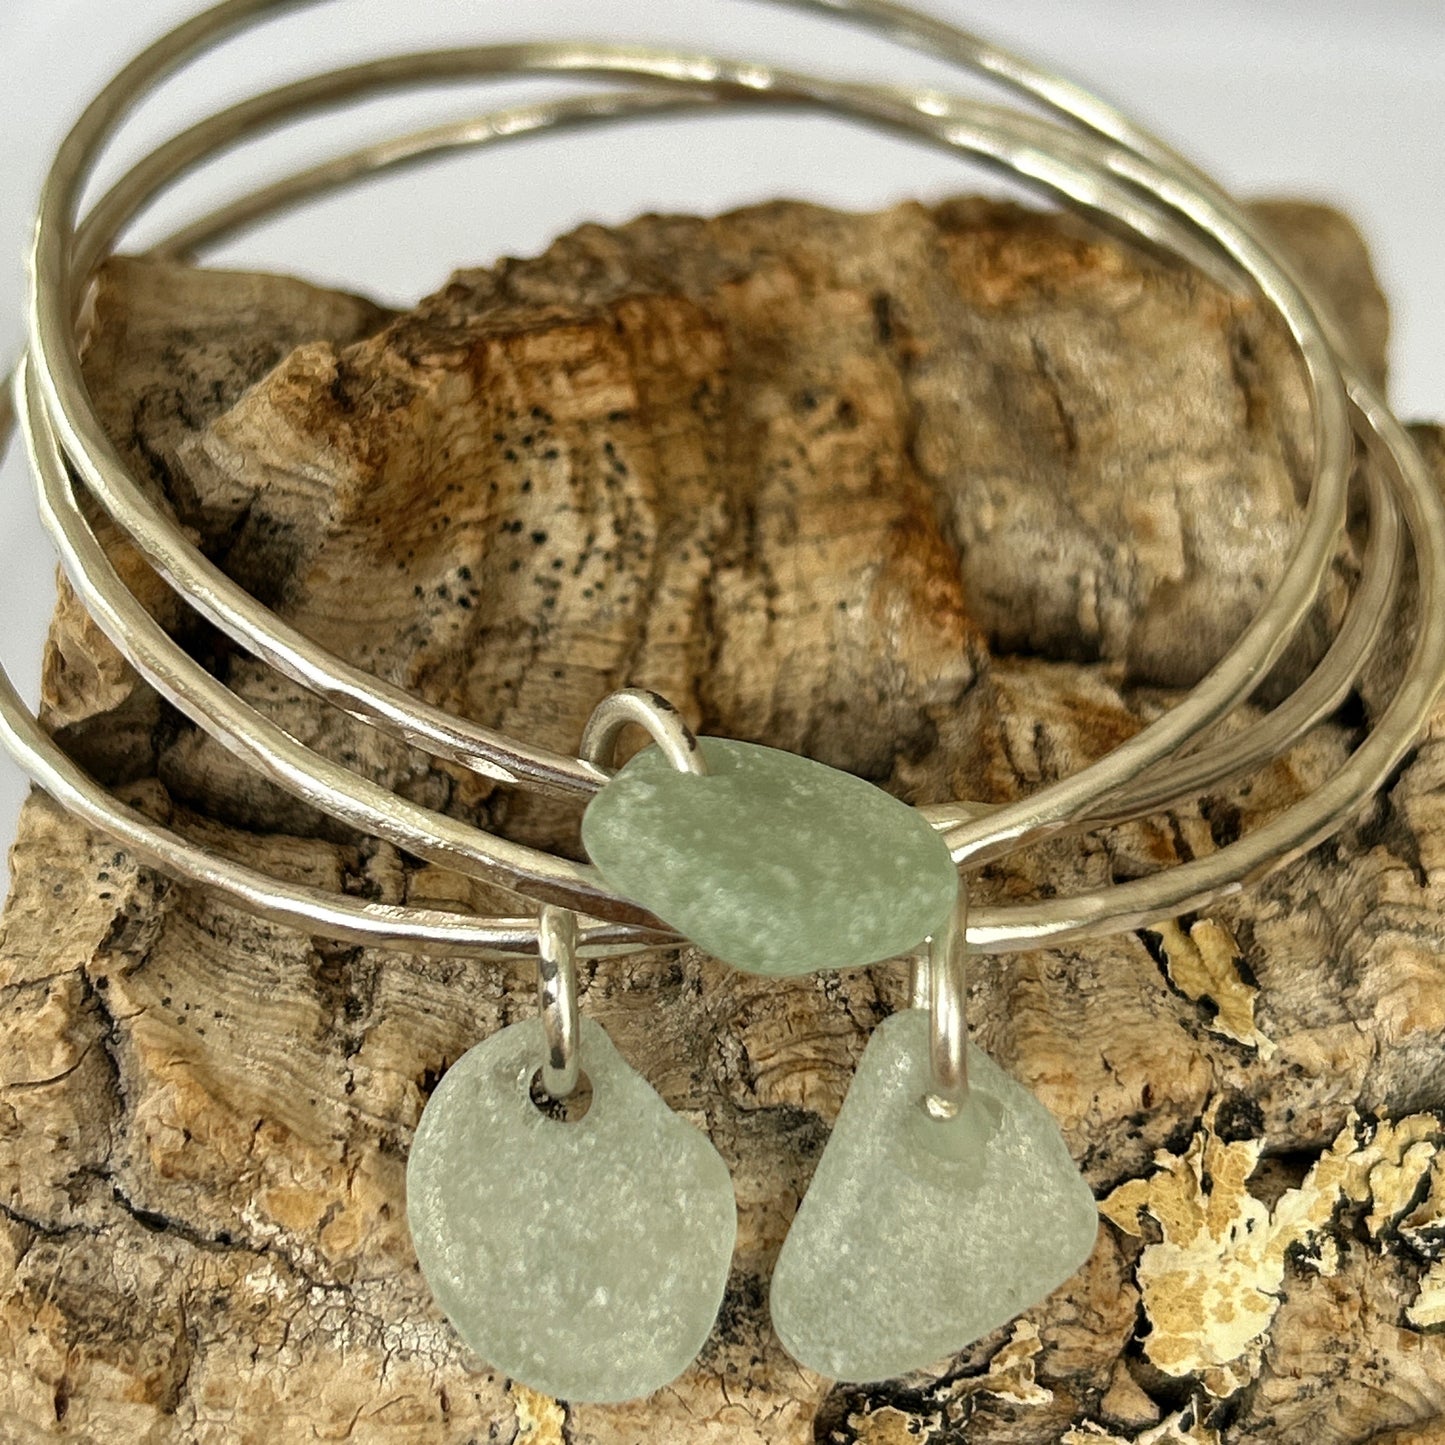 Silver Trio Interlinked Bangle With Sea Glass Charms - Silver Lines Jewellery